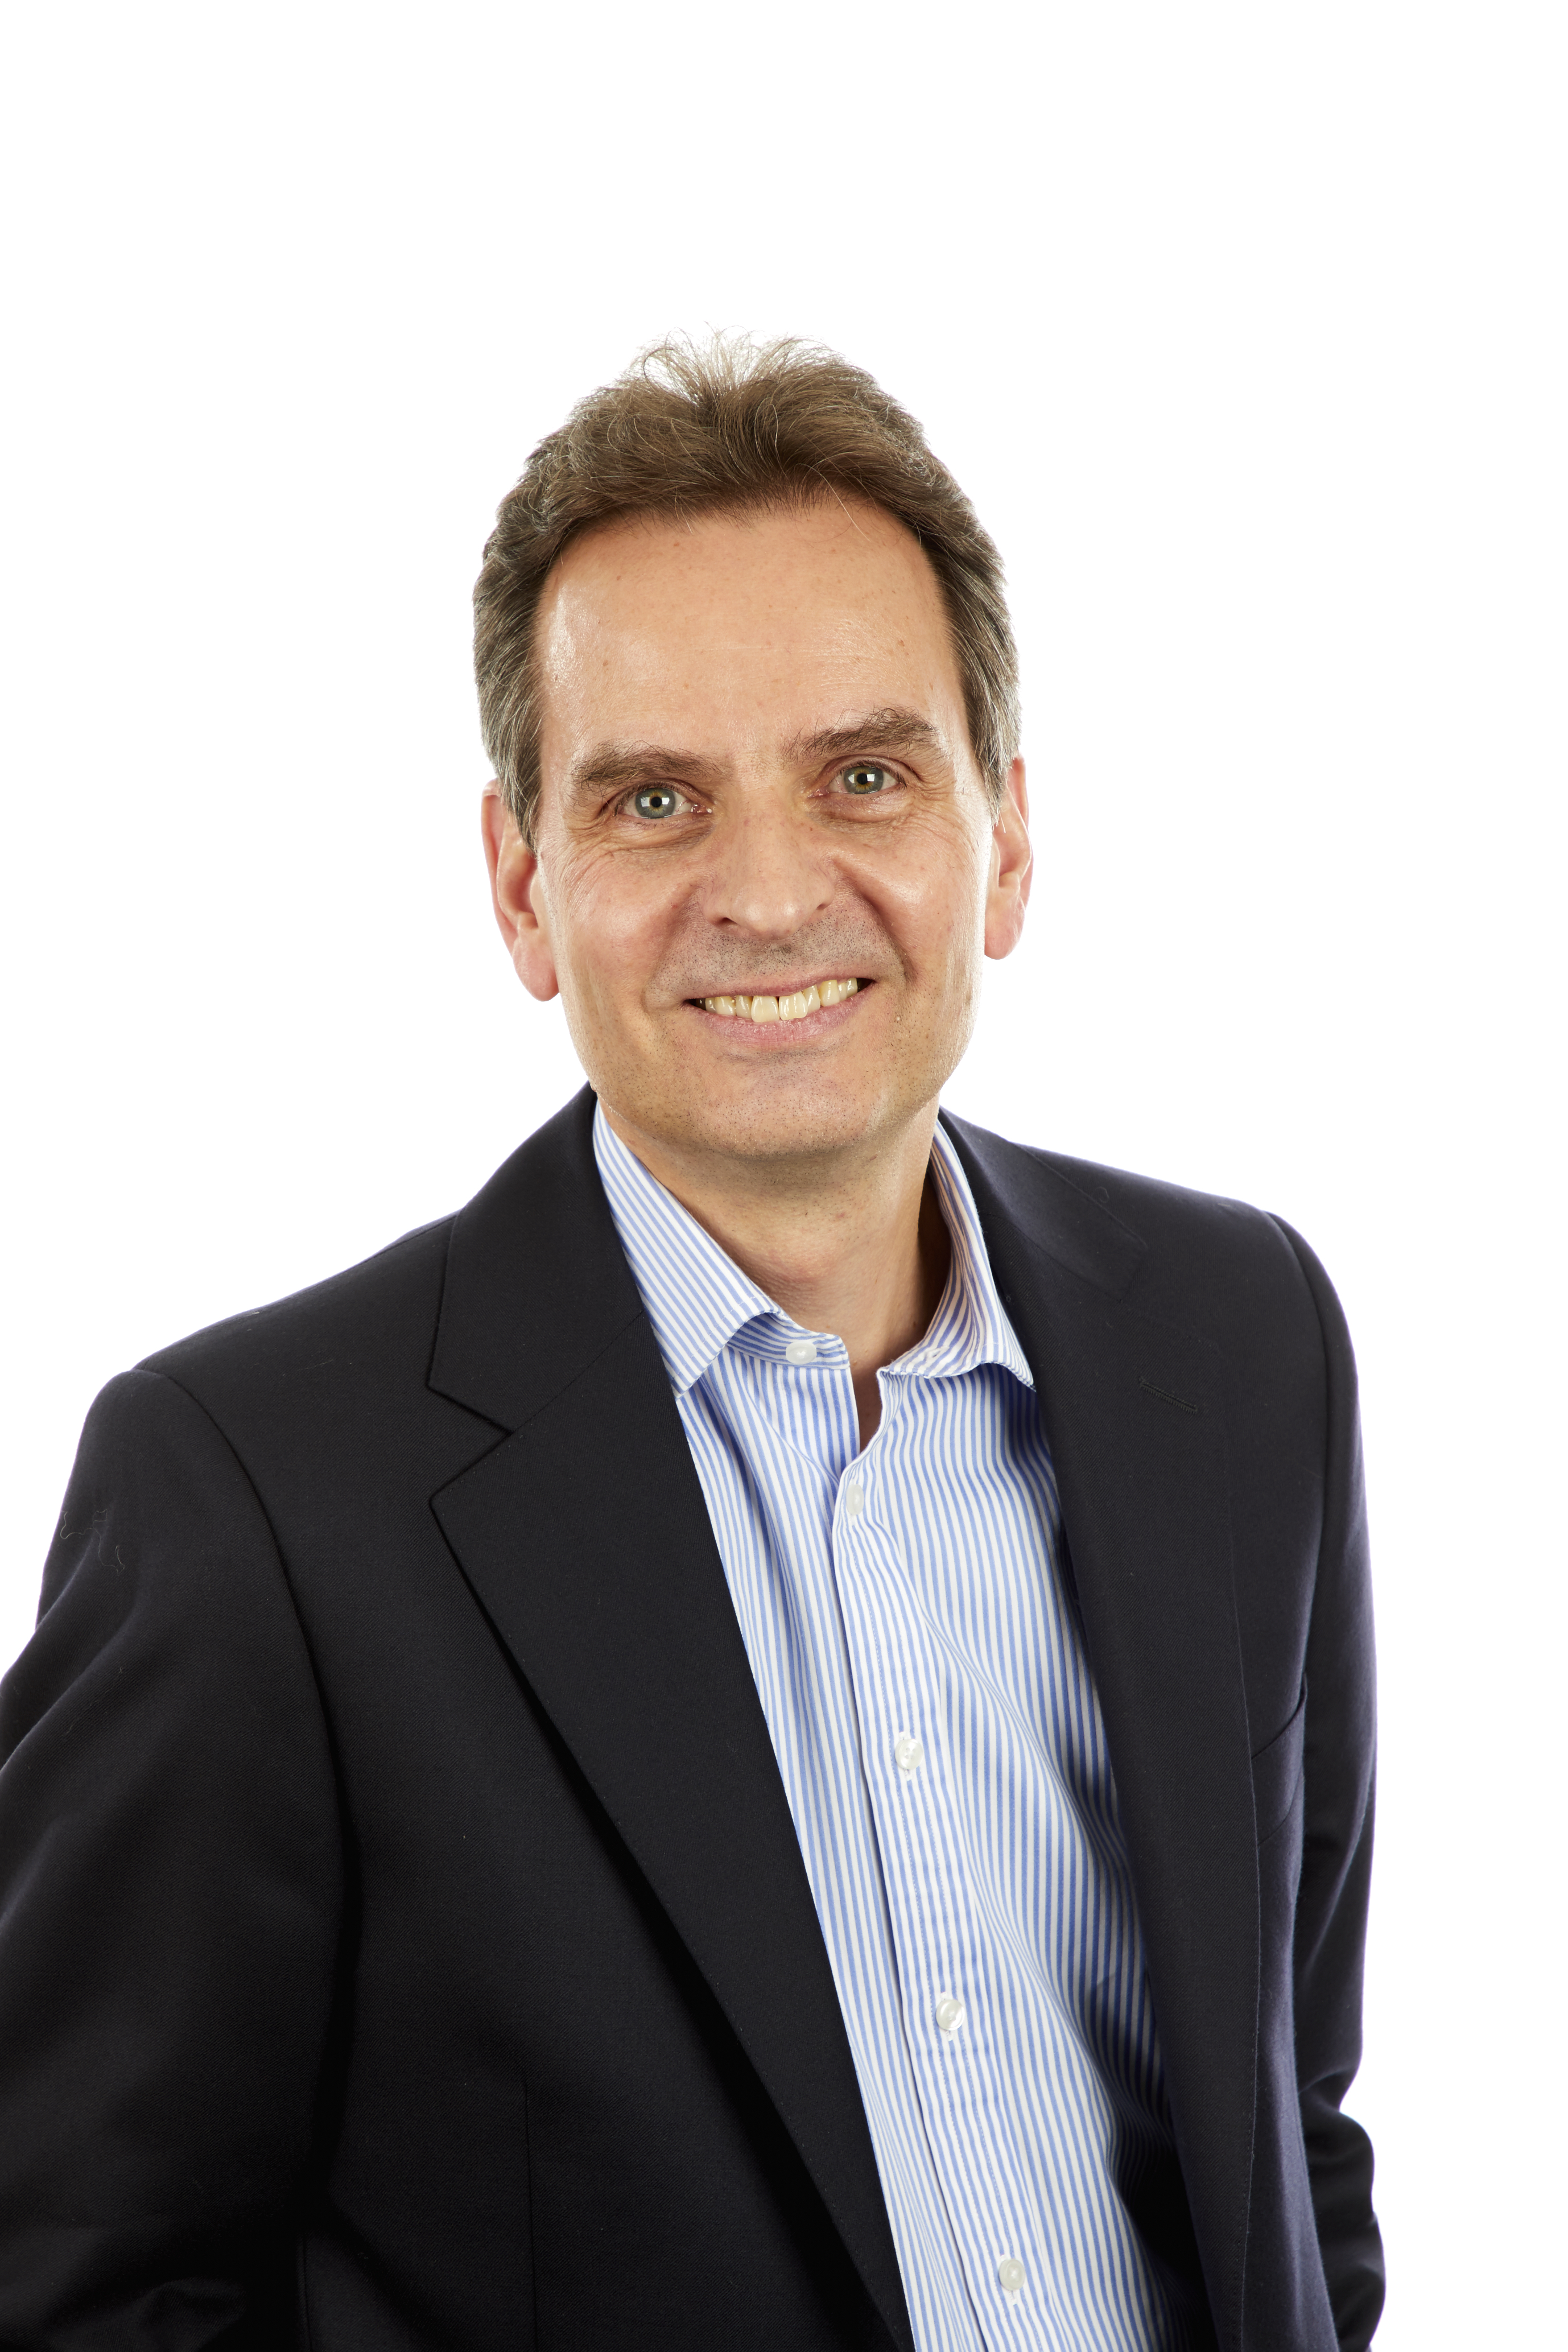 activpayroll appoints David Deacon as chief people officer